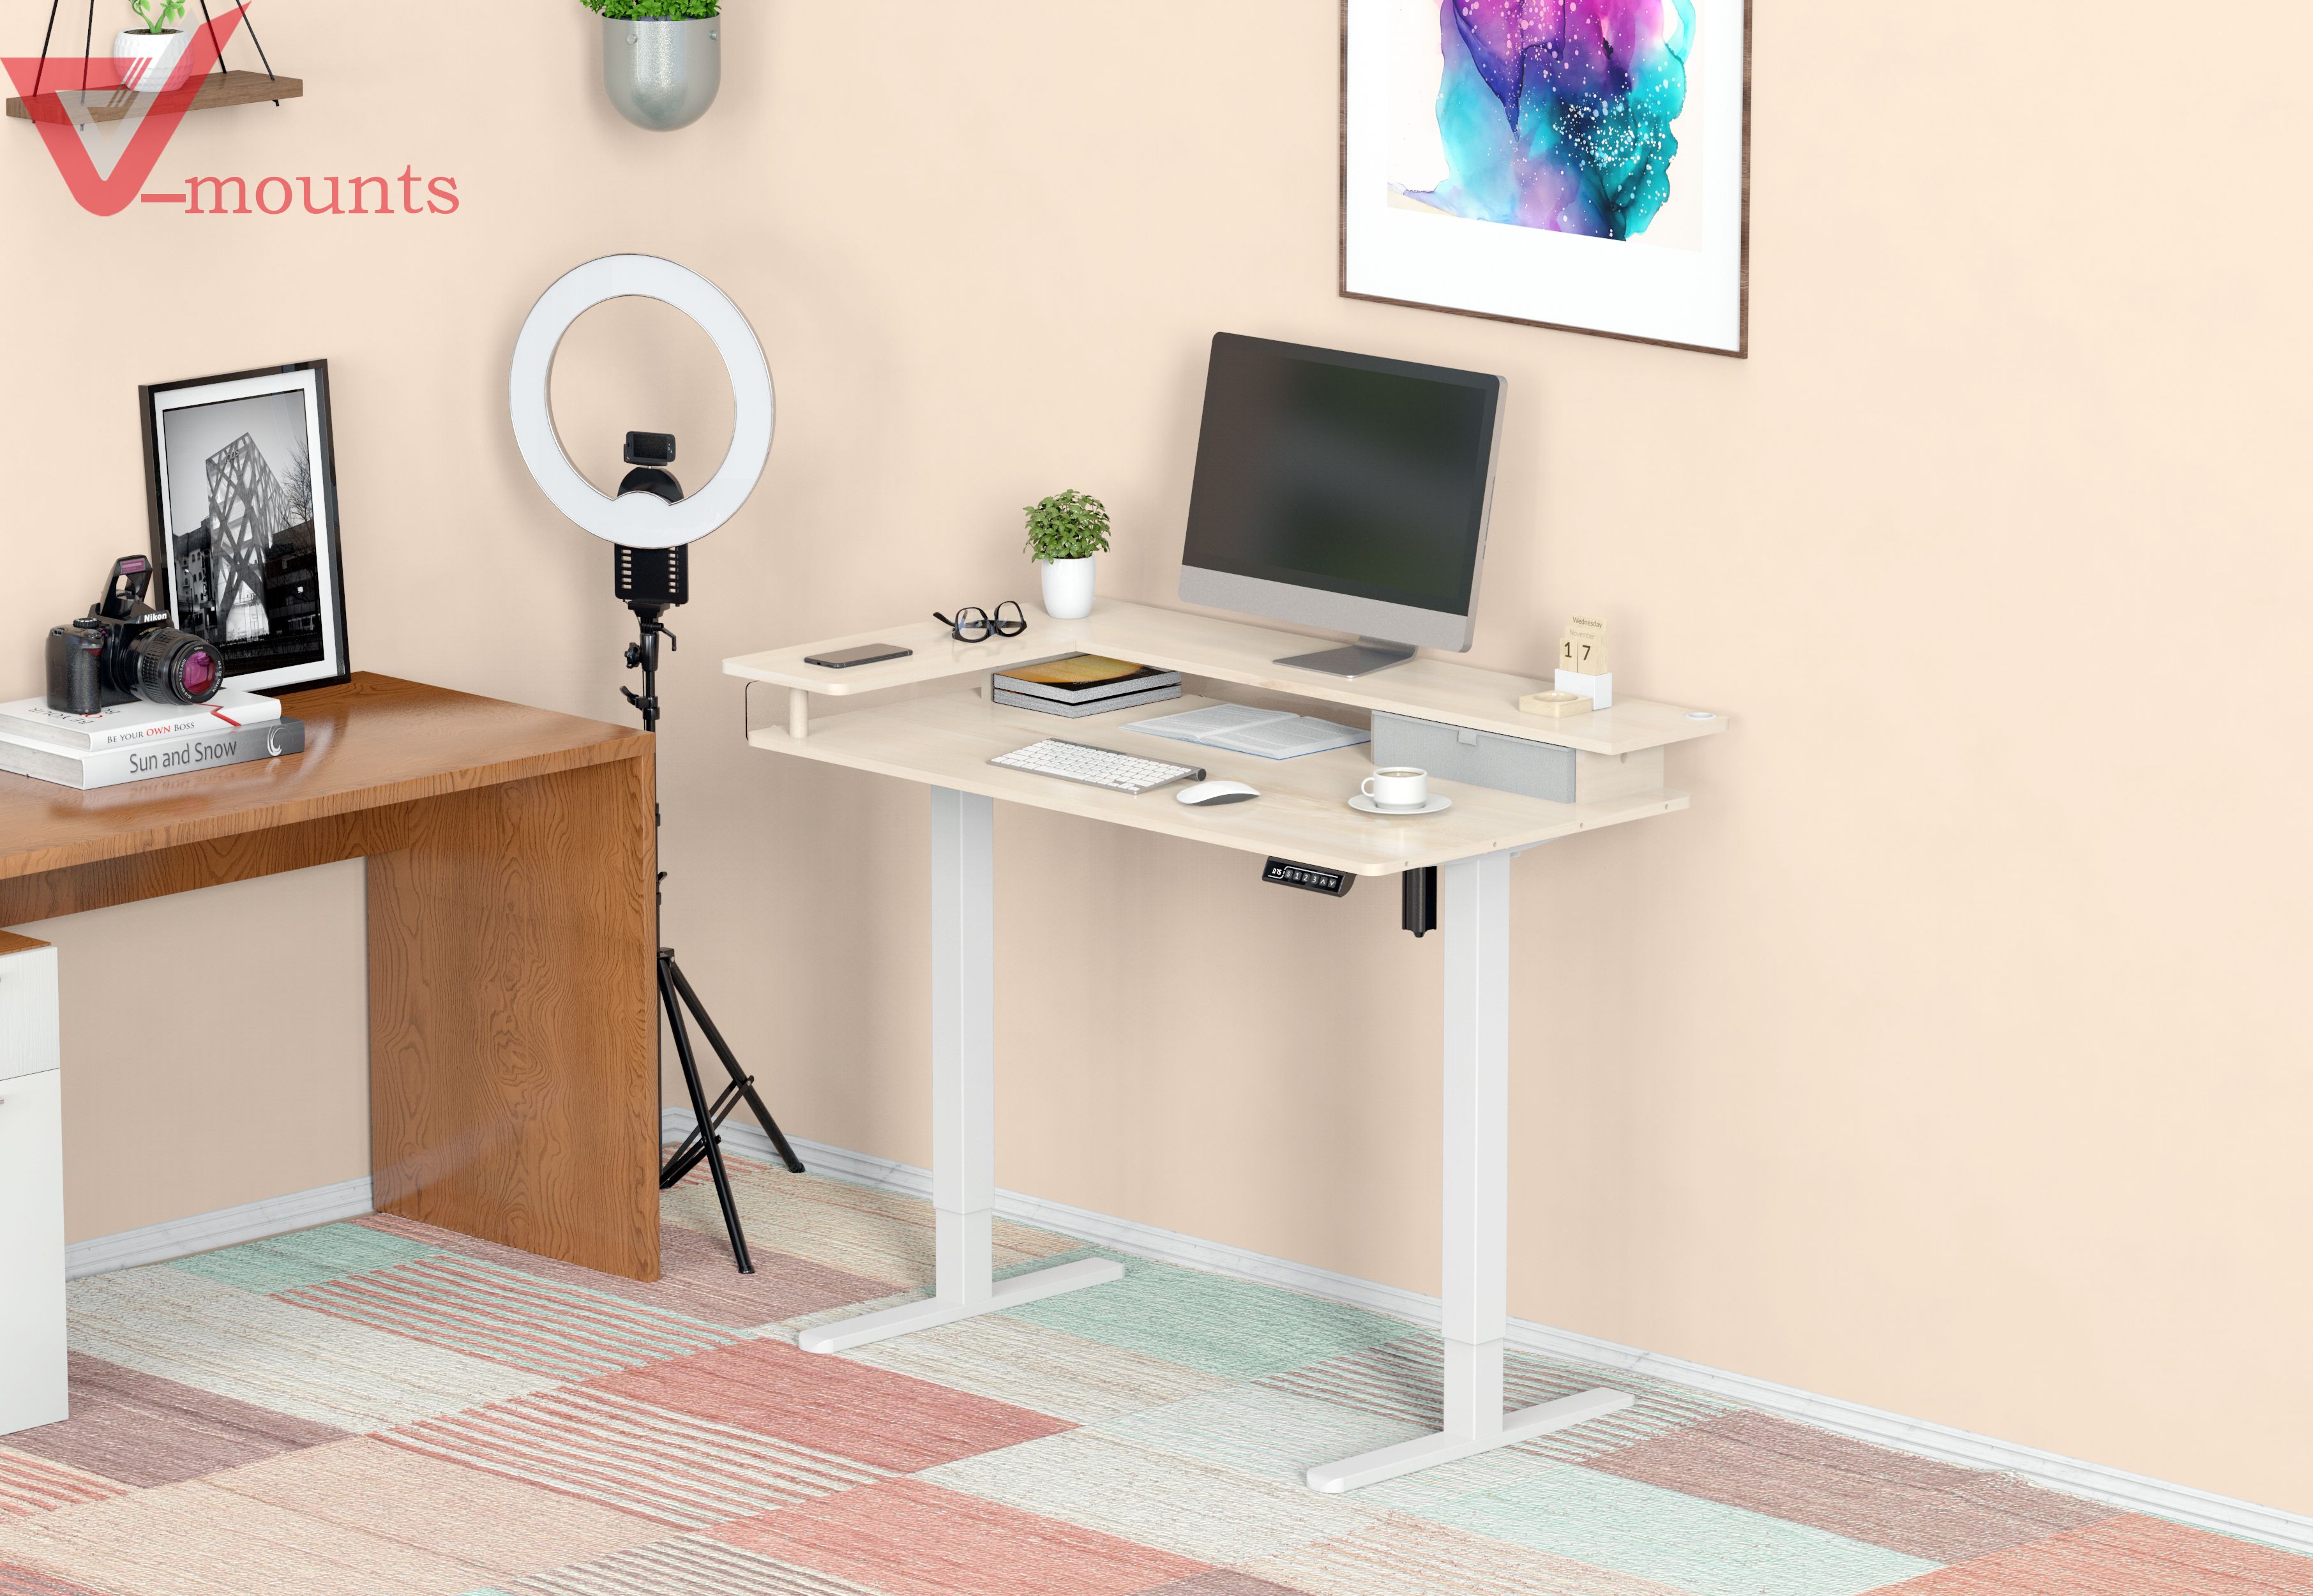 V-mounts L Shape Double-deck Electric Height Adjustable Desk With Drawer  JSD5-02-ZW-L